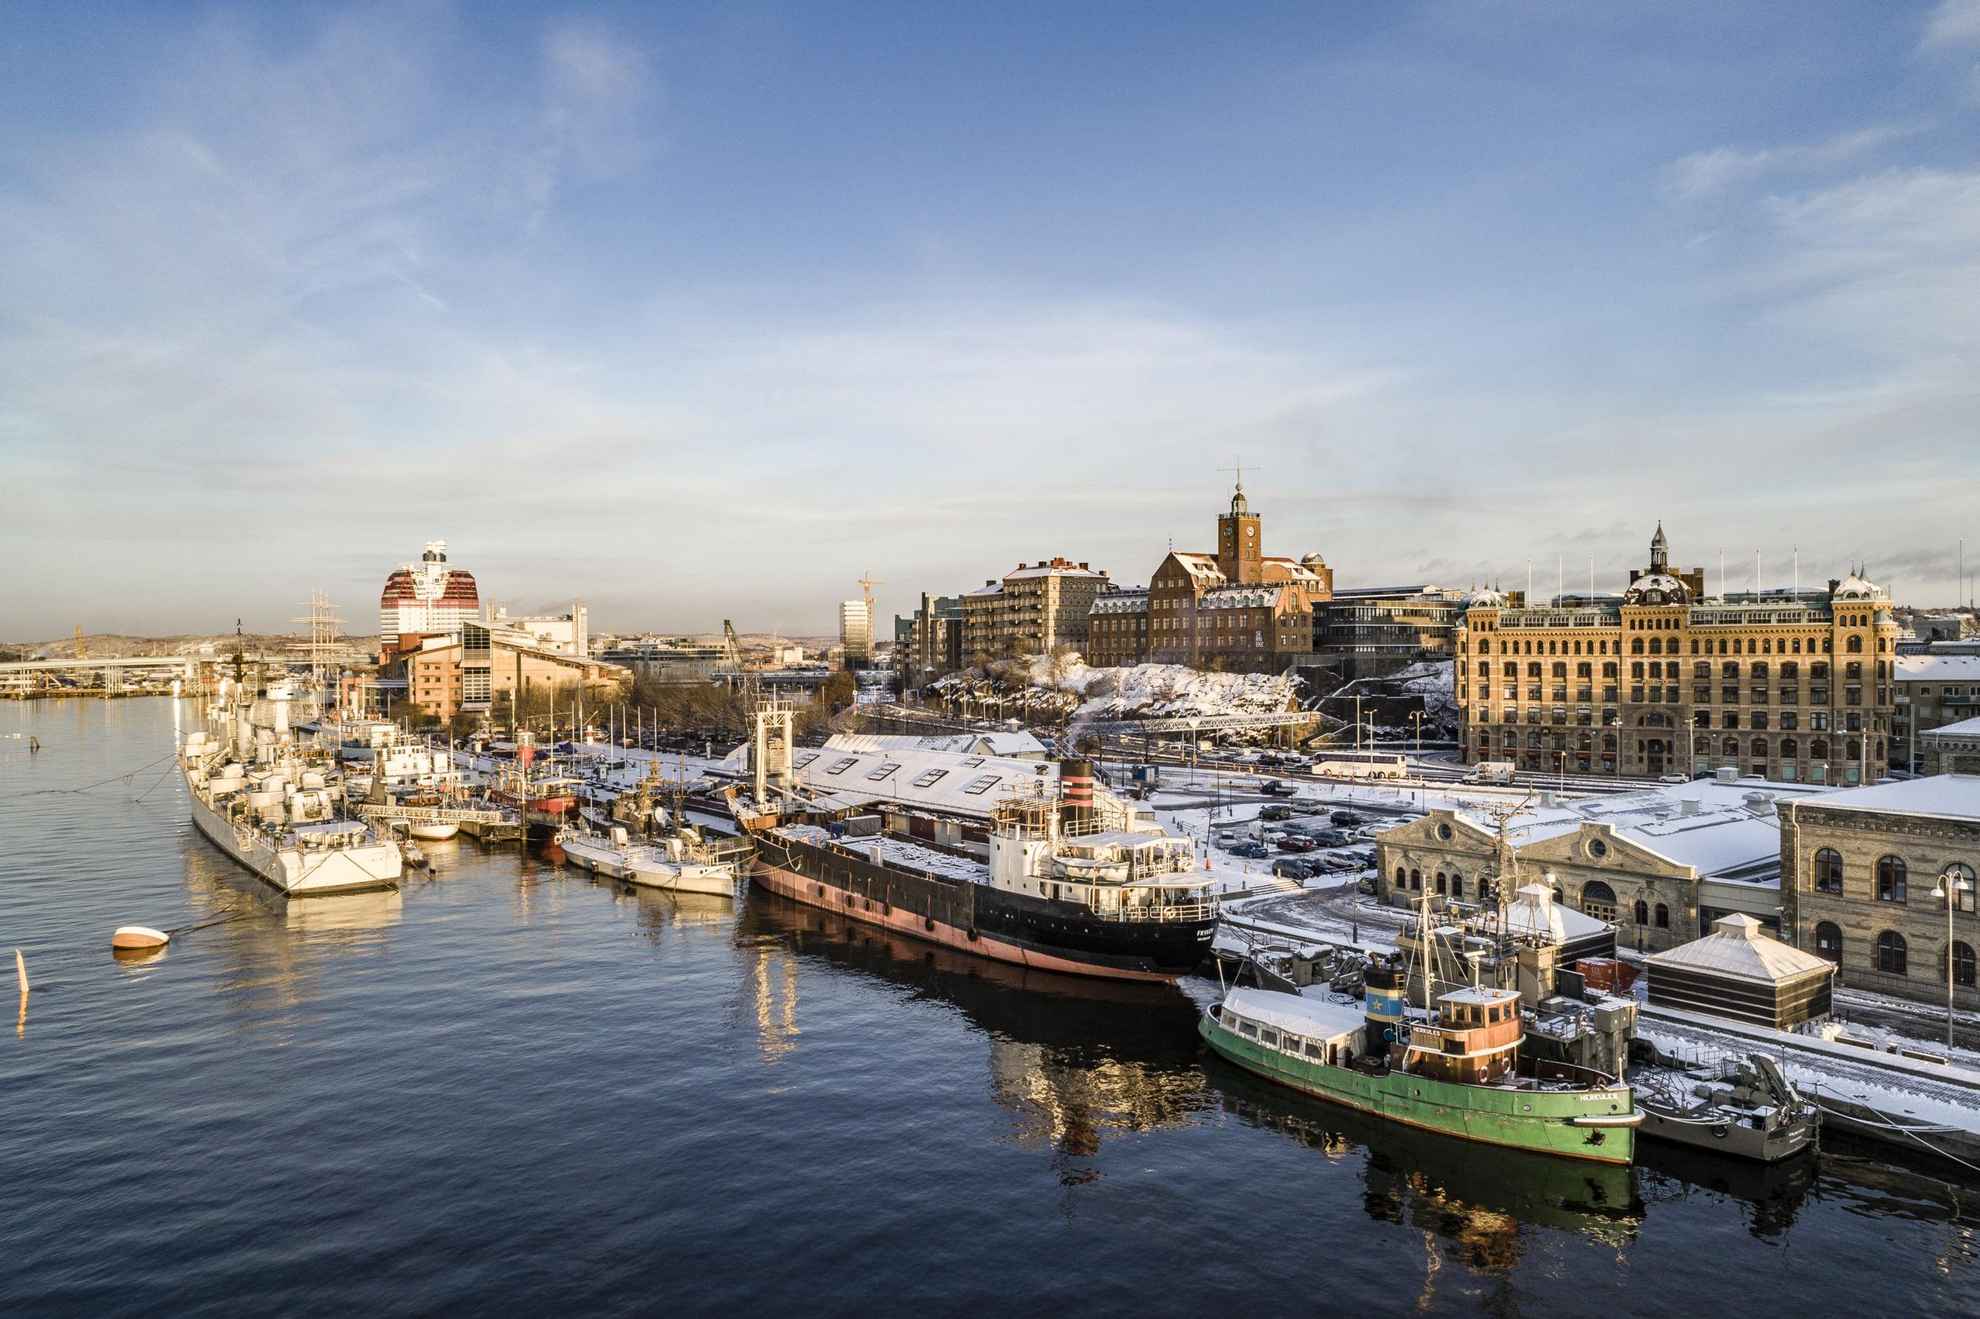 Boats and cargo ships in a harbor during winter.